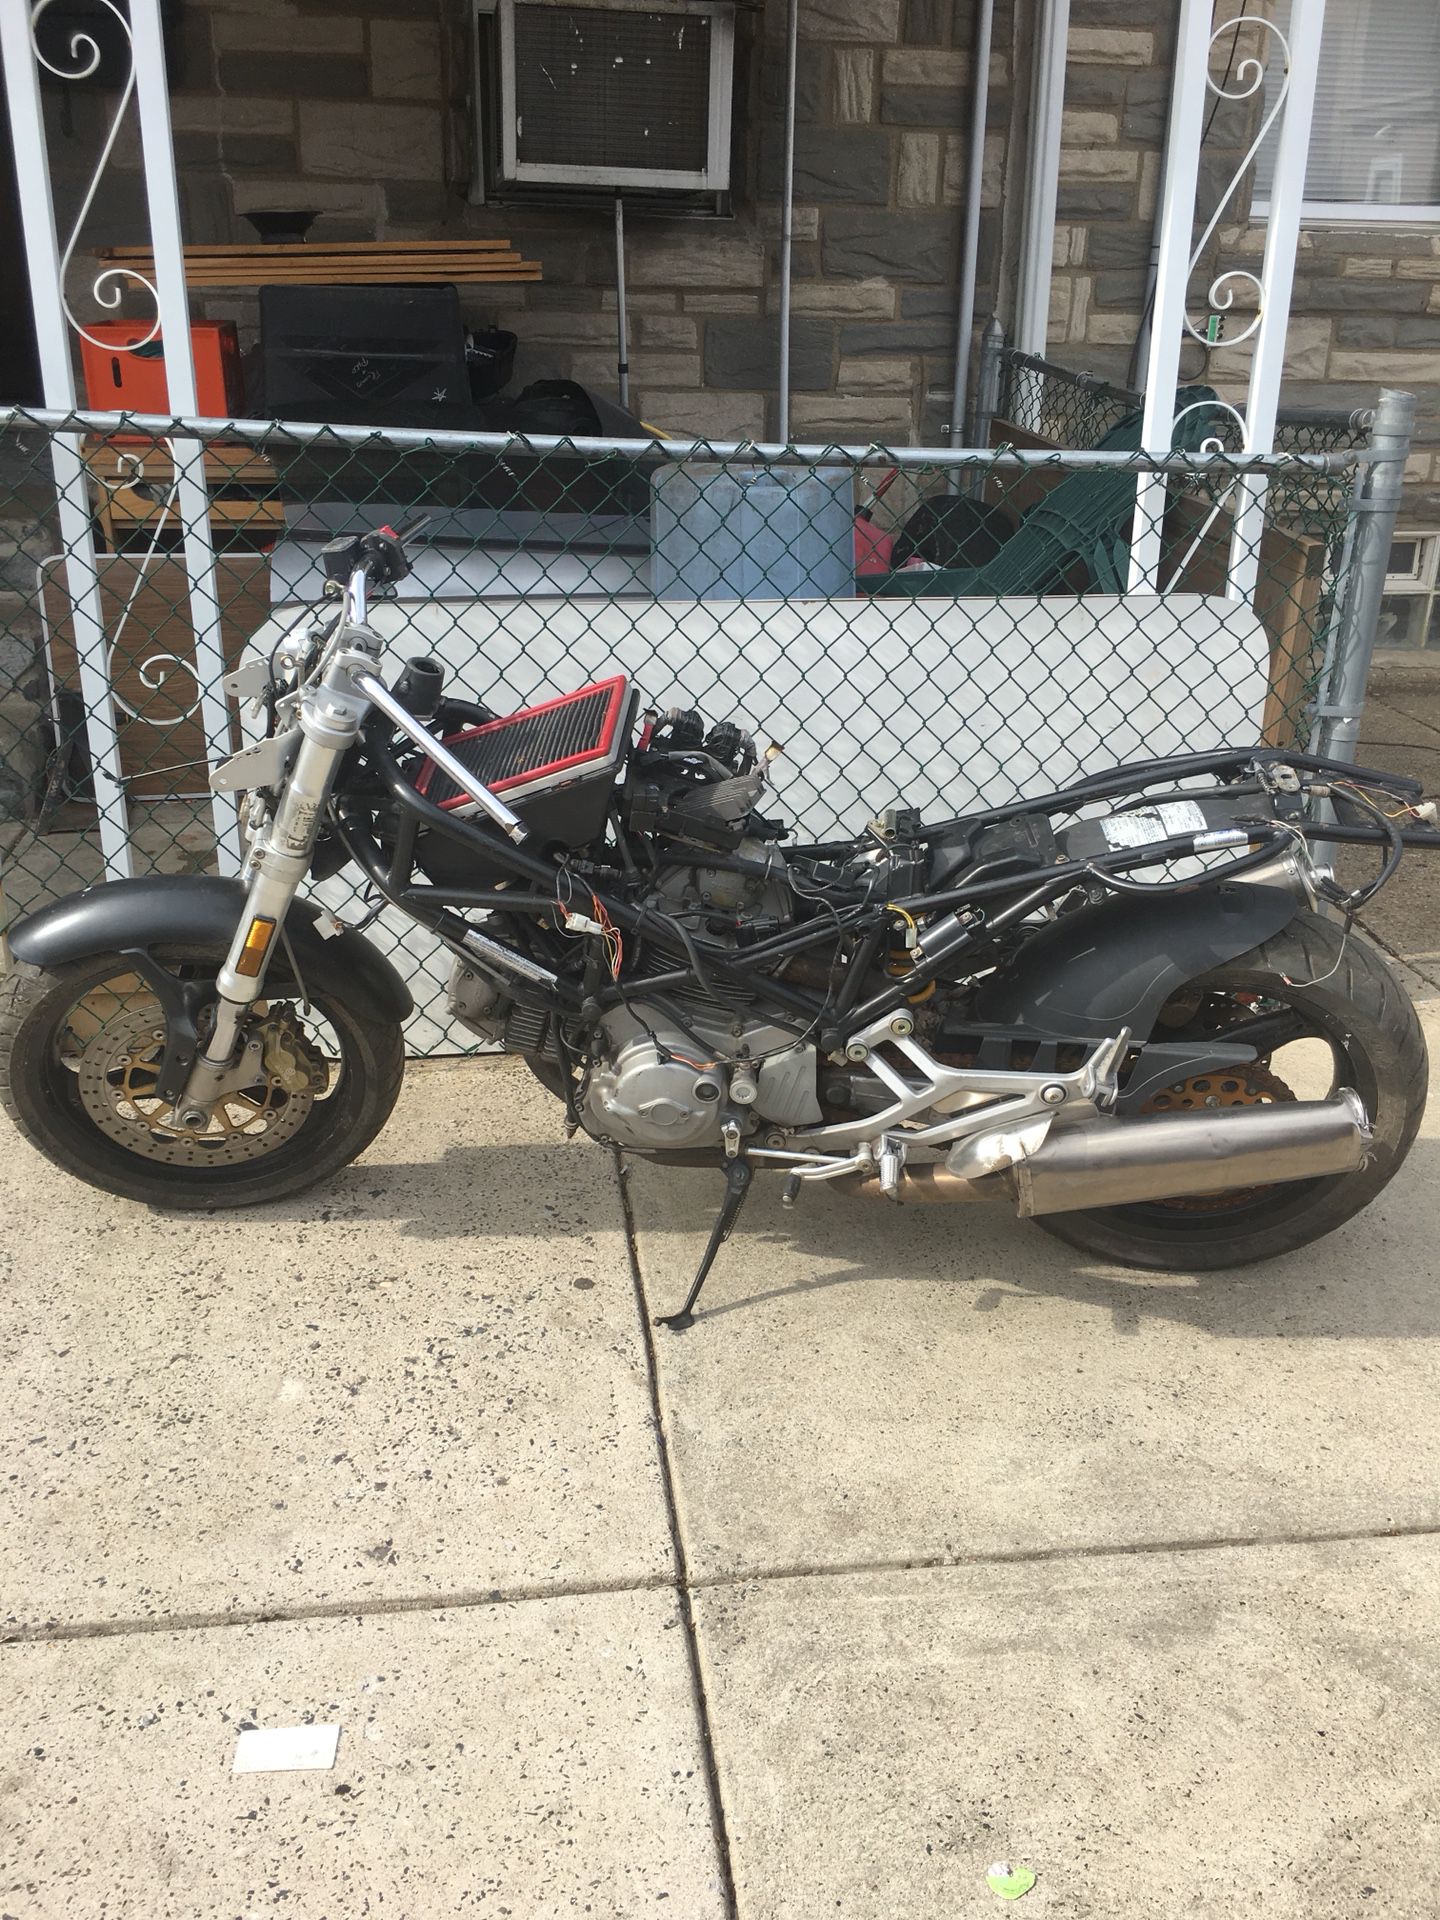 DUCATI MOTORCYCLE NO KEYS NO TITLE. AS IS $500 OR PARTS FOR SALE